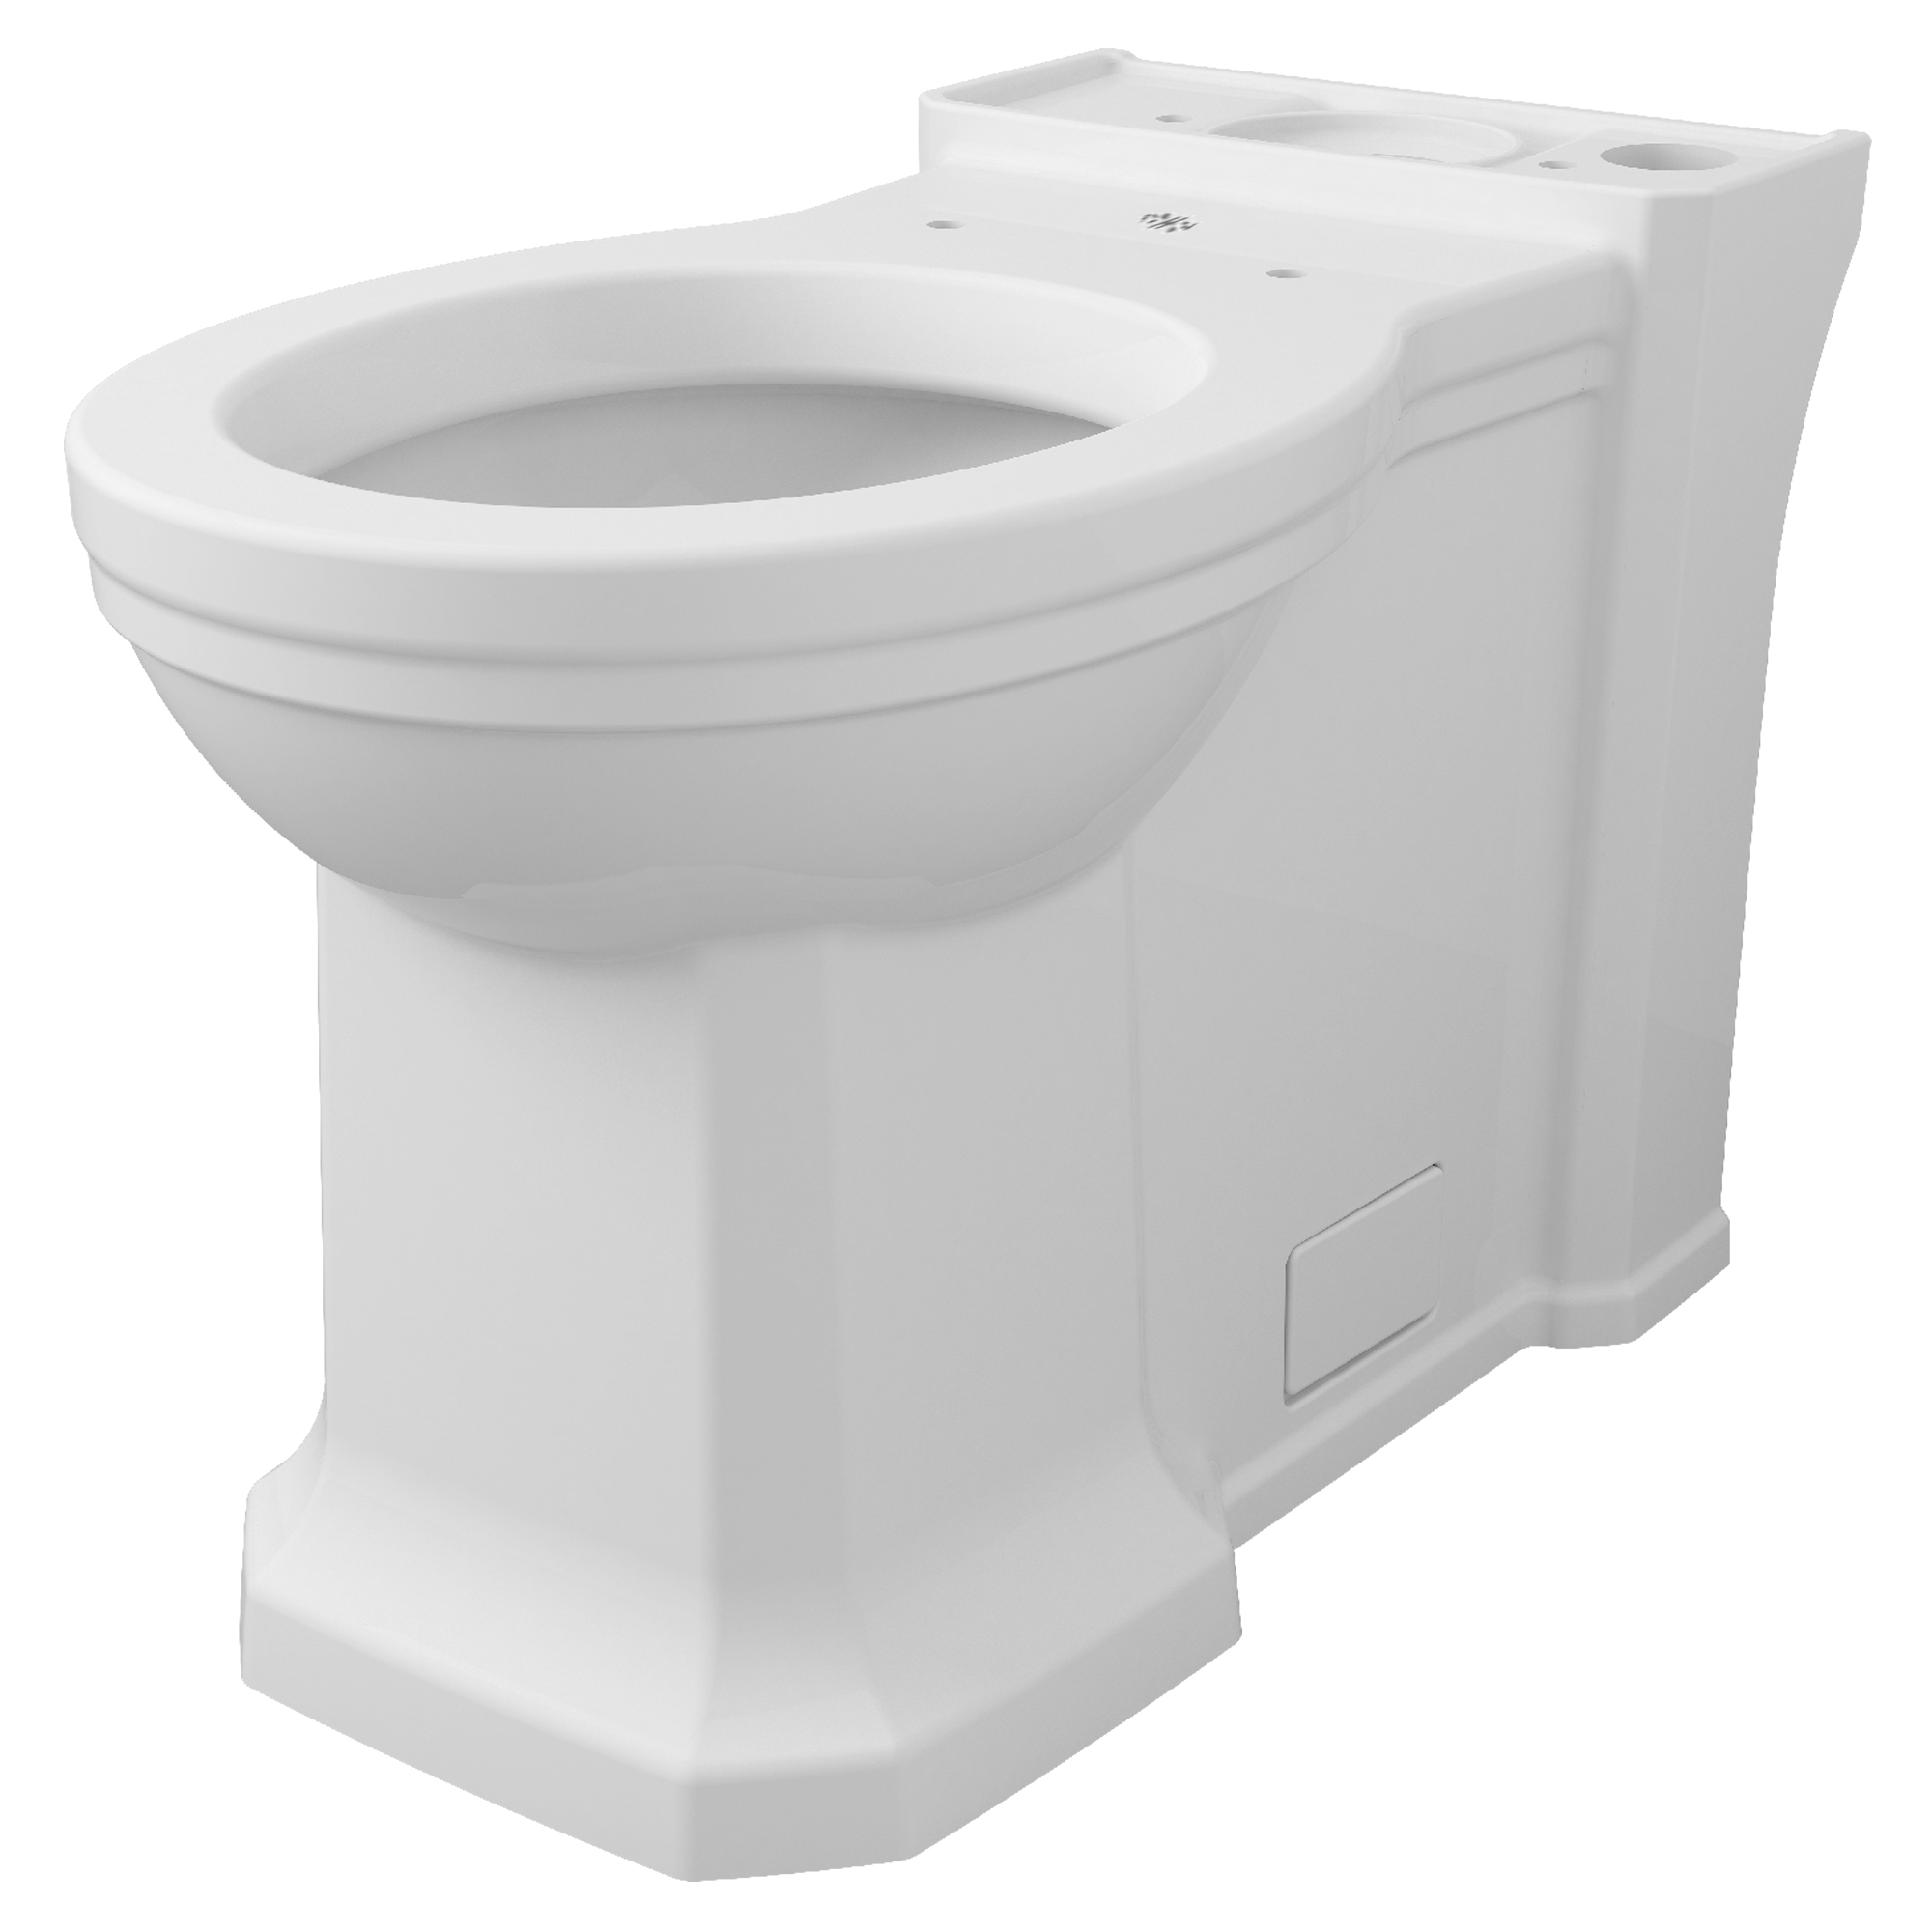 Fitzgerald® Chair Height Round Front Toilet Bowl with Seat